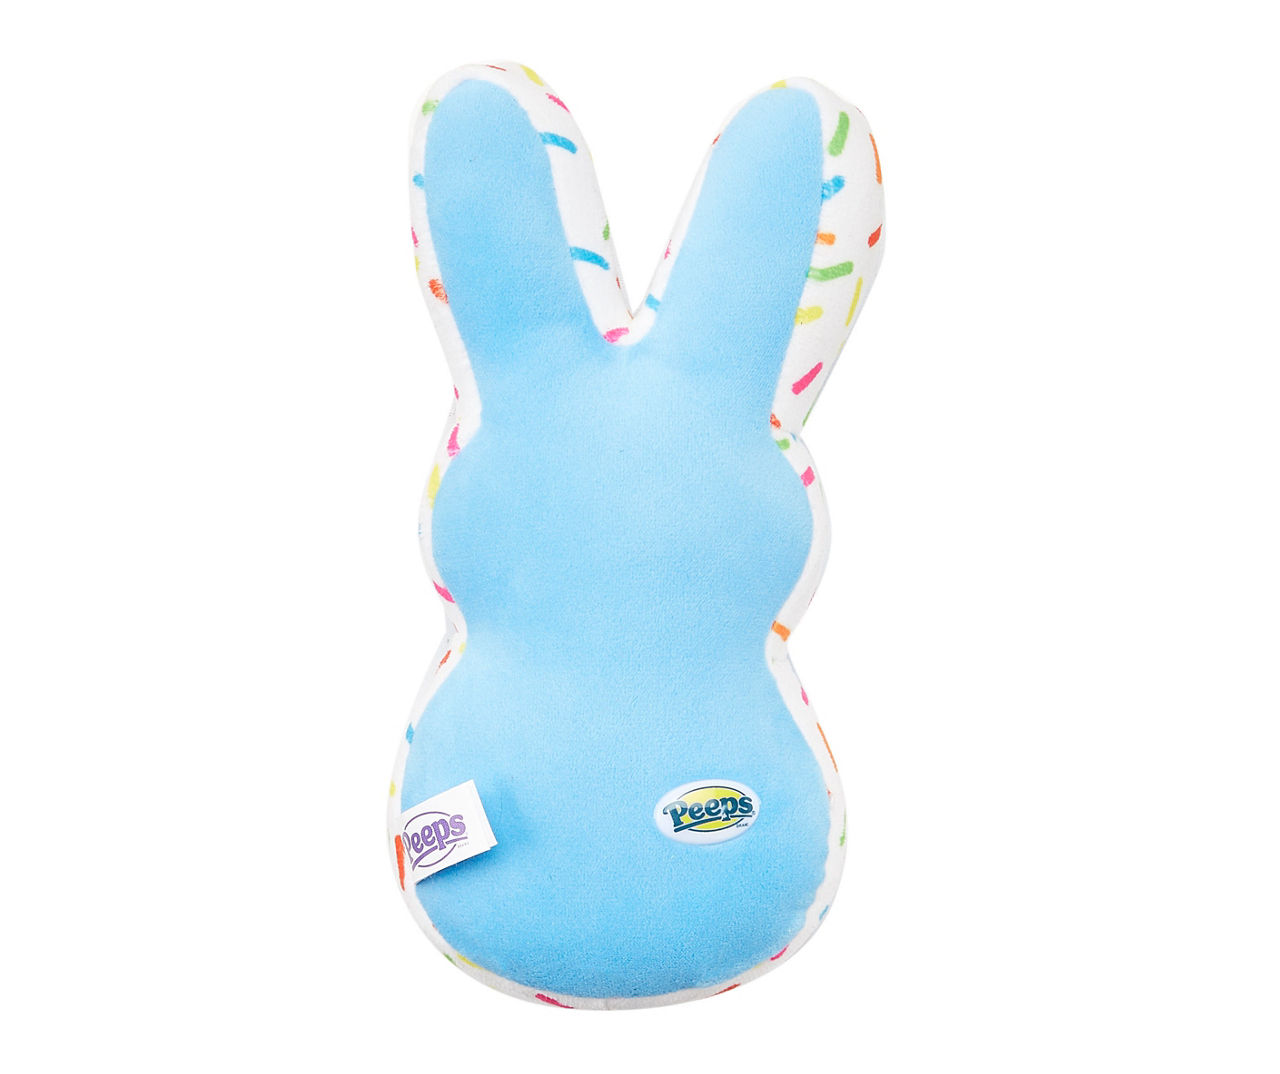 Peeps Plush Bunny Squeaky Toy (blue) : Target